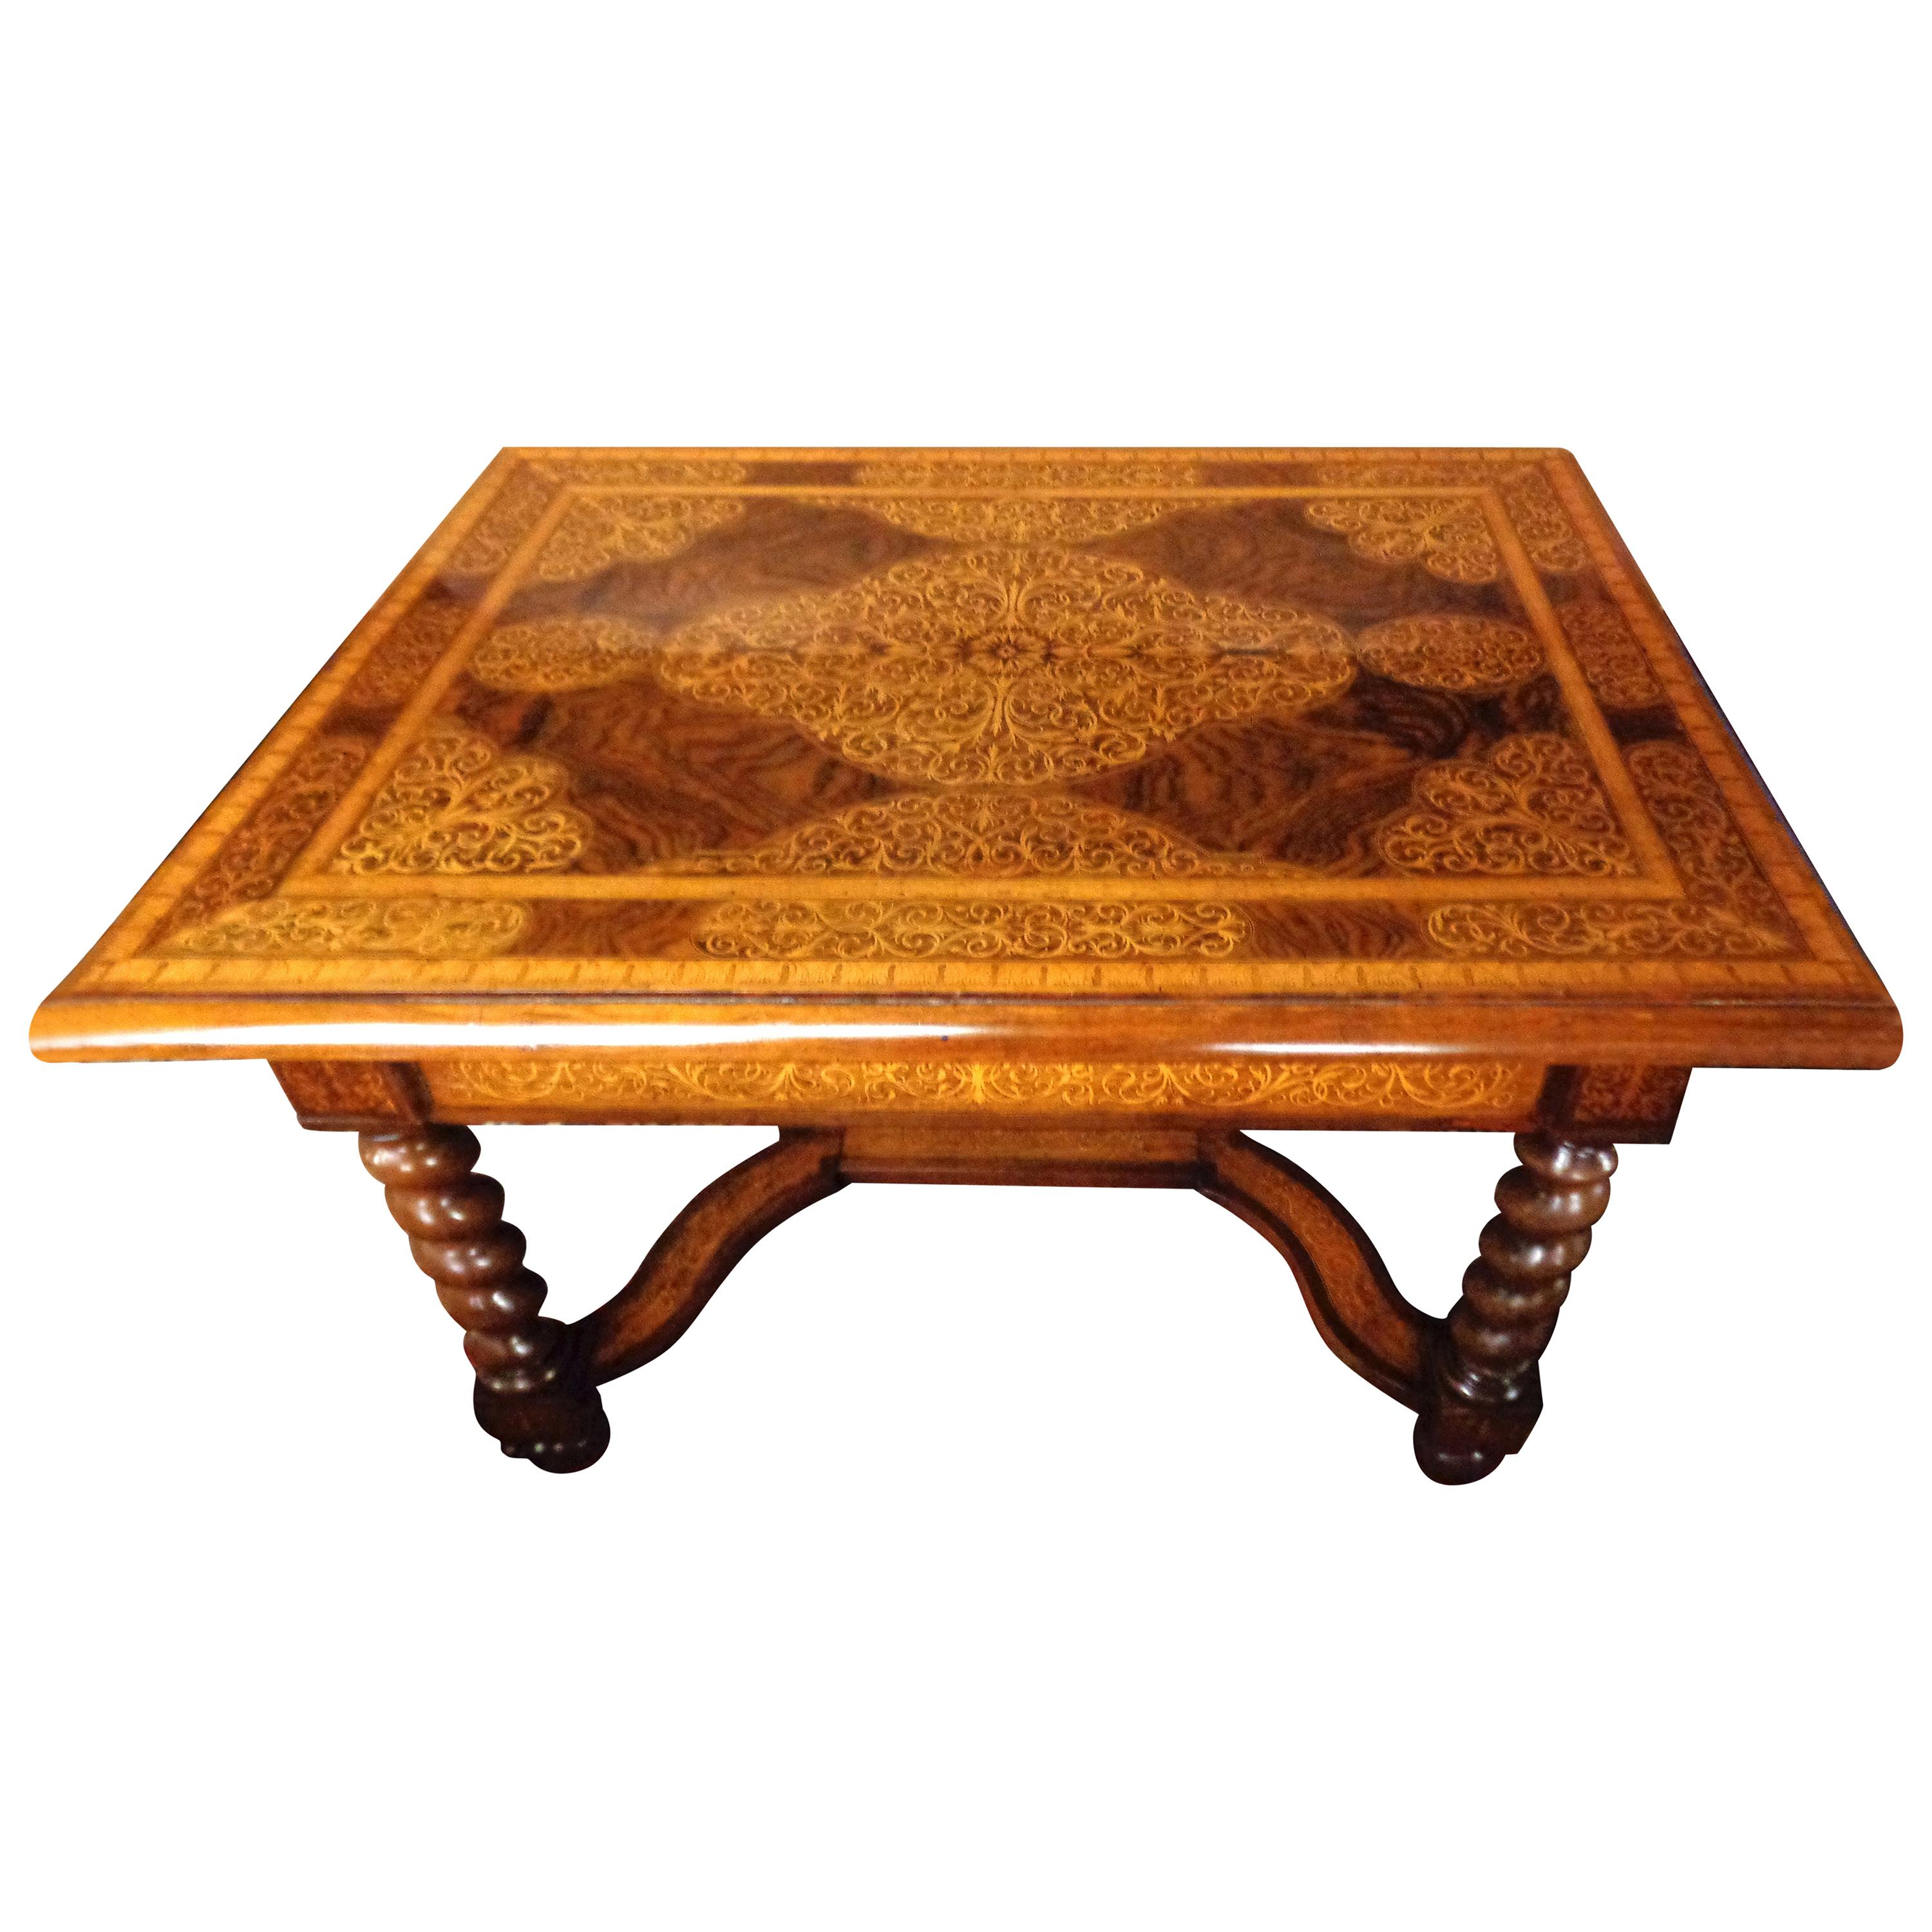 Dutch Double Sided Figured Walnut Occasional Table with Inlaid Seaweed Marquetry For Sale